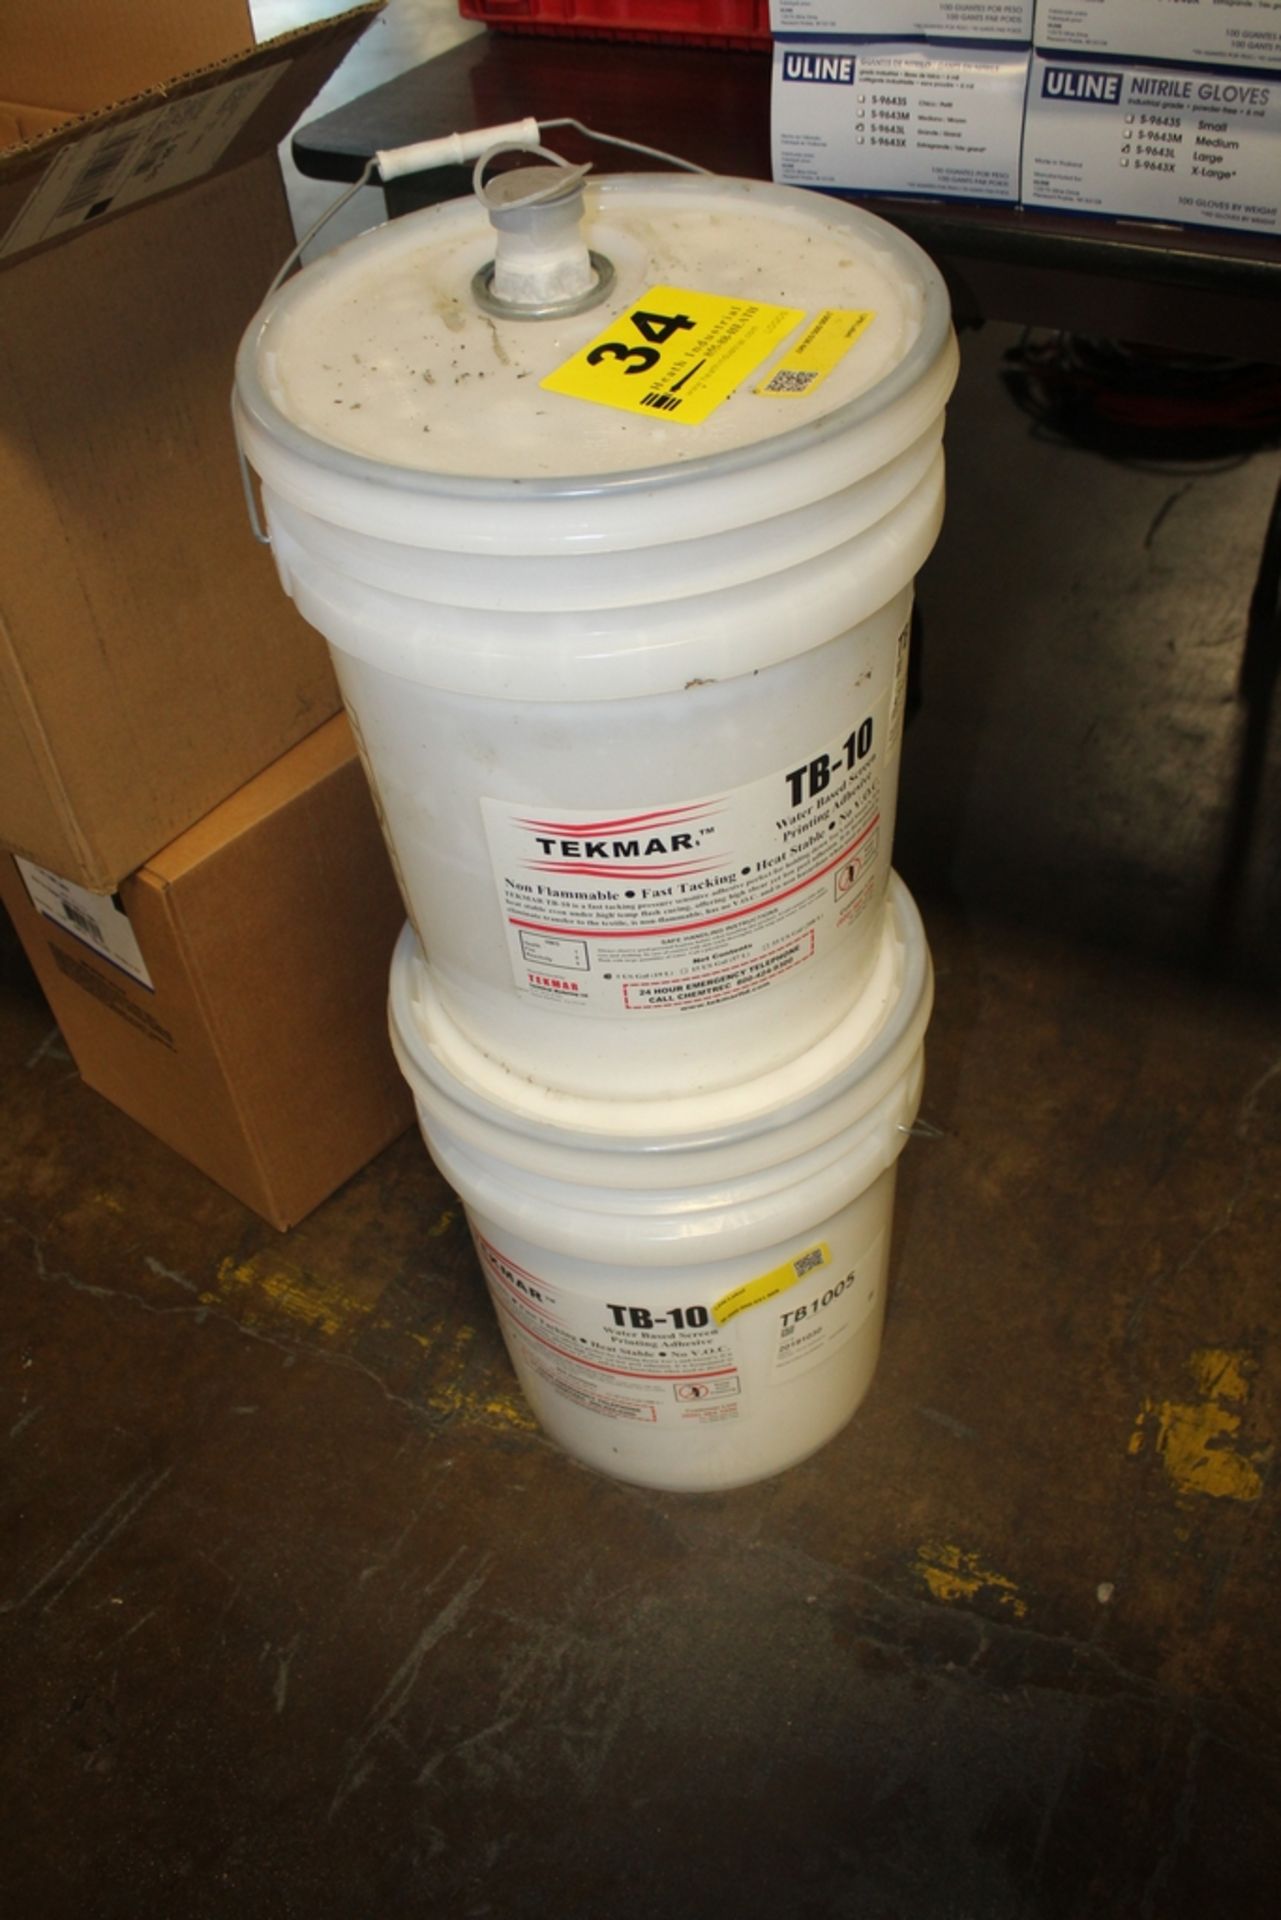 (2) CONTAINERS OF TEKMAR TB-10 WATER BASED SCREEN PRINTING ADHESIVE